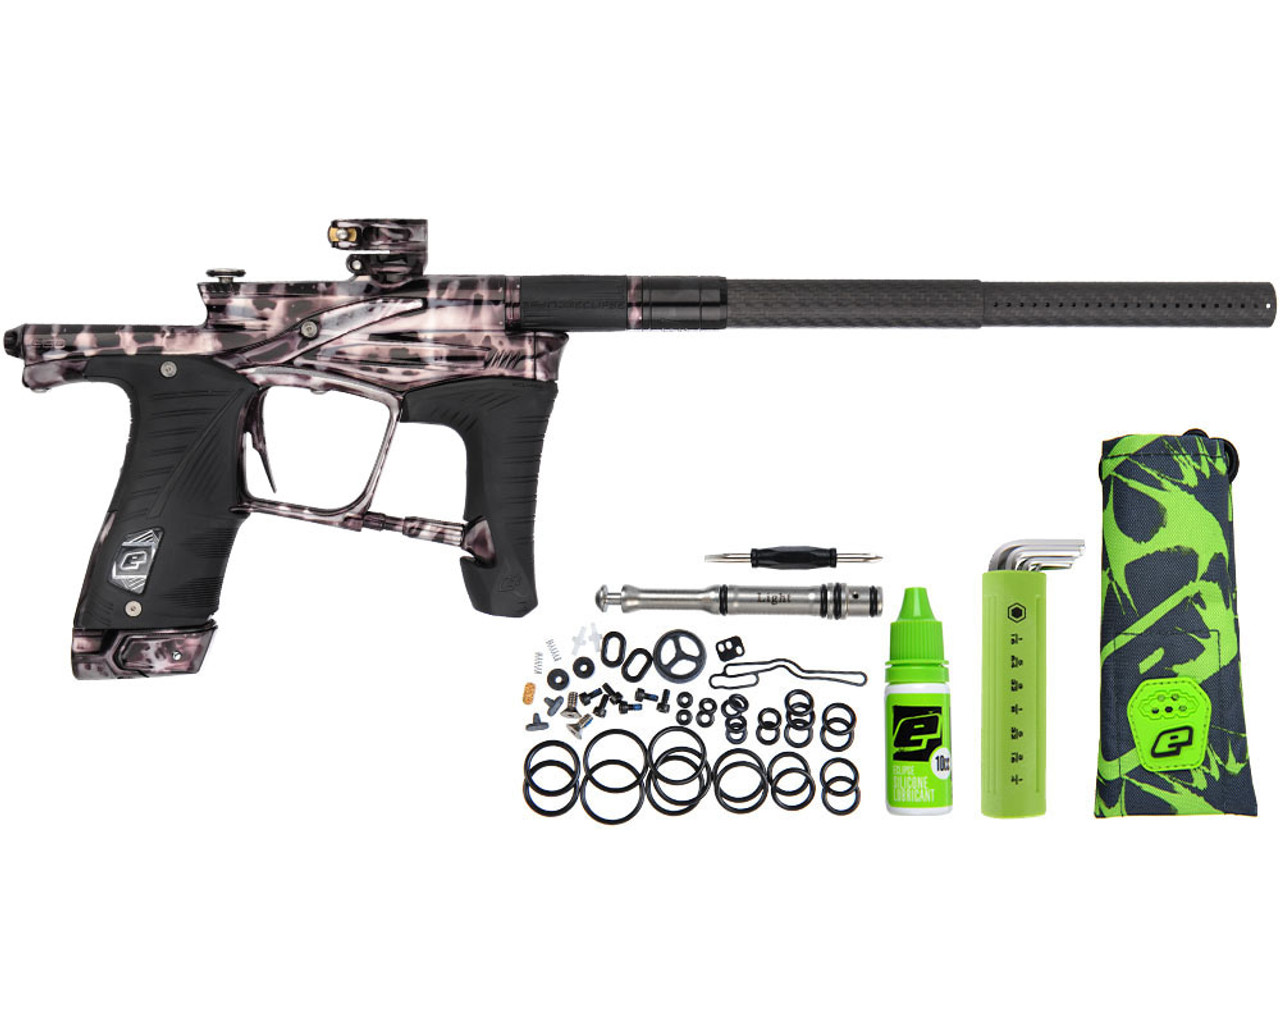 Planet Eclipse Ego LV1.6 Paintball Gun - Midnight Series - Review 